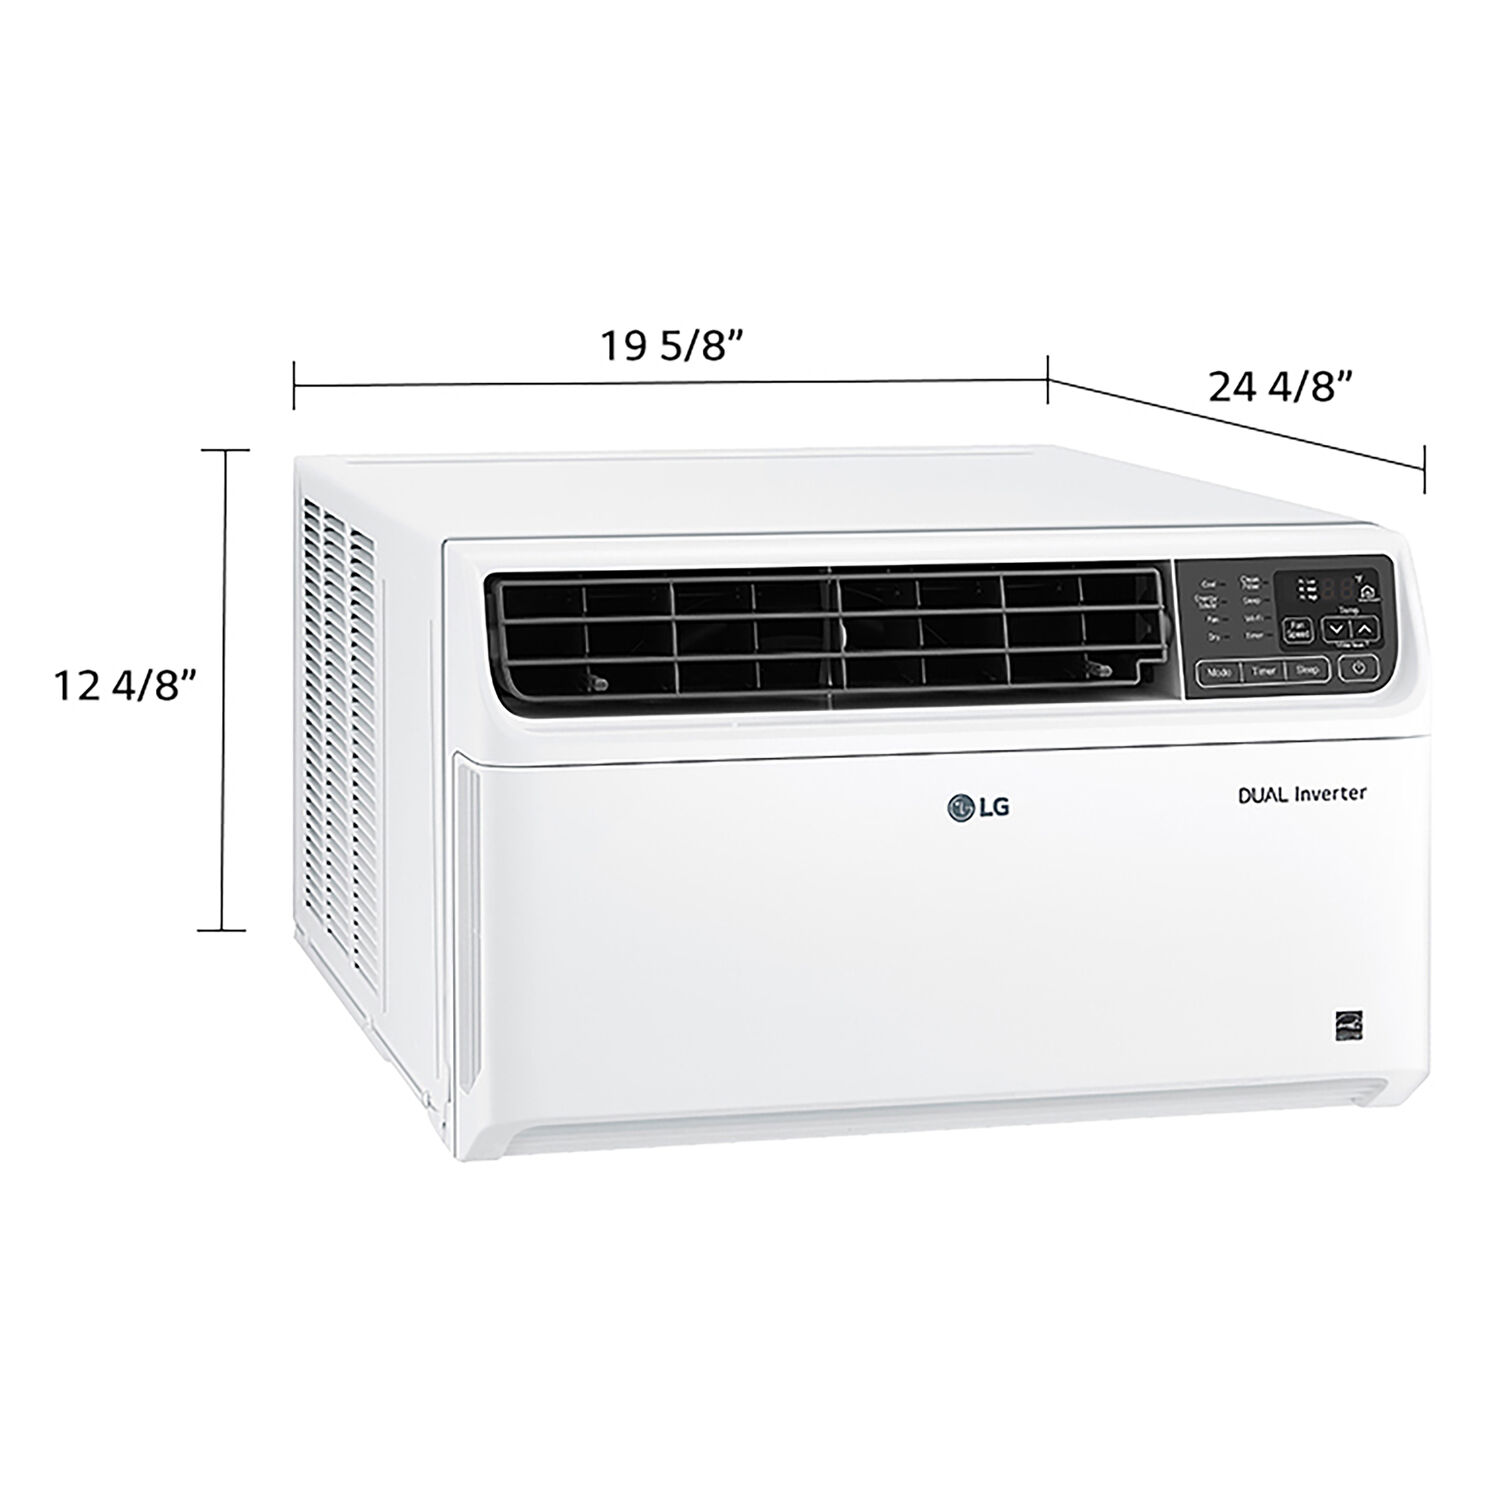 LG 8,000 BTU DUAL Inverter Smart Window Air Conditioner, Cools 340 sq ft, Works with Amazon Alexa - image 4 of 9